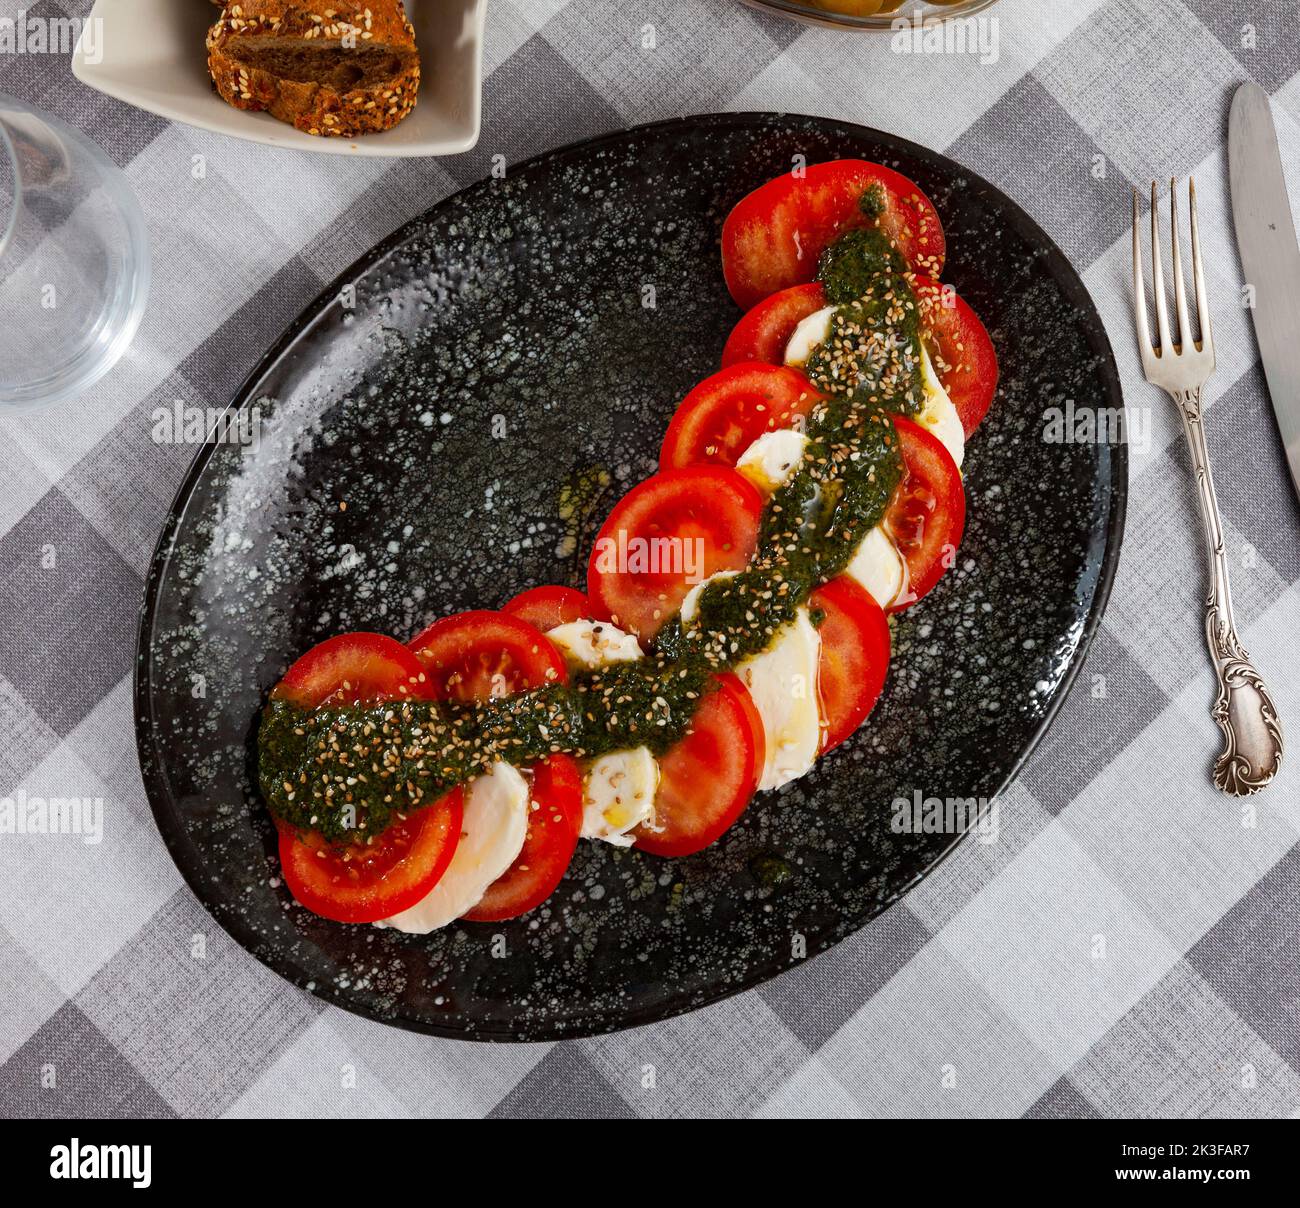 Traditional dish of Italian cuisine caprese salad with fresh tomatoes and mozzarella cheese Stock Photo